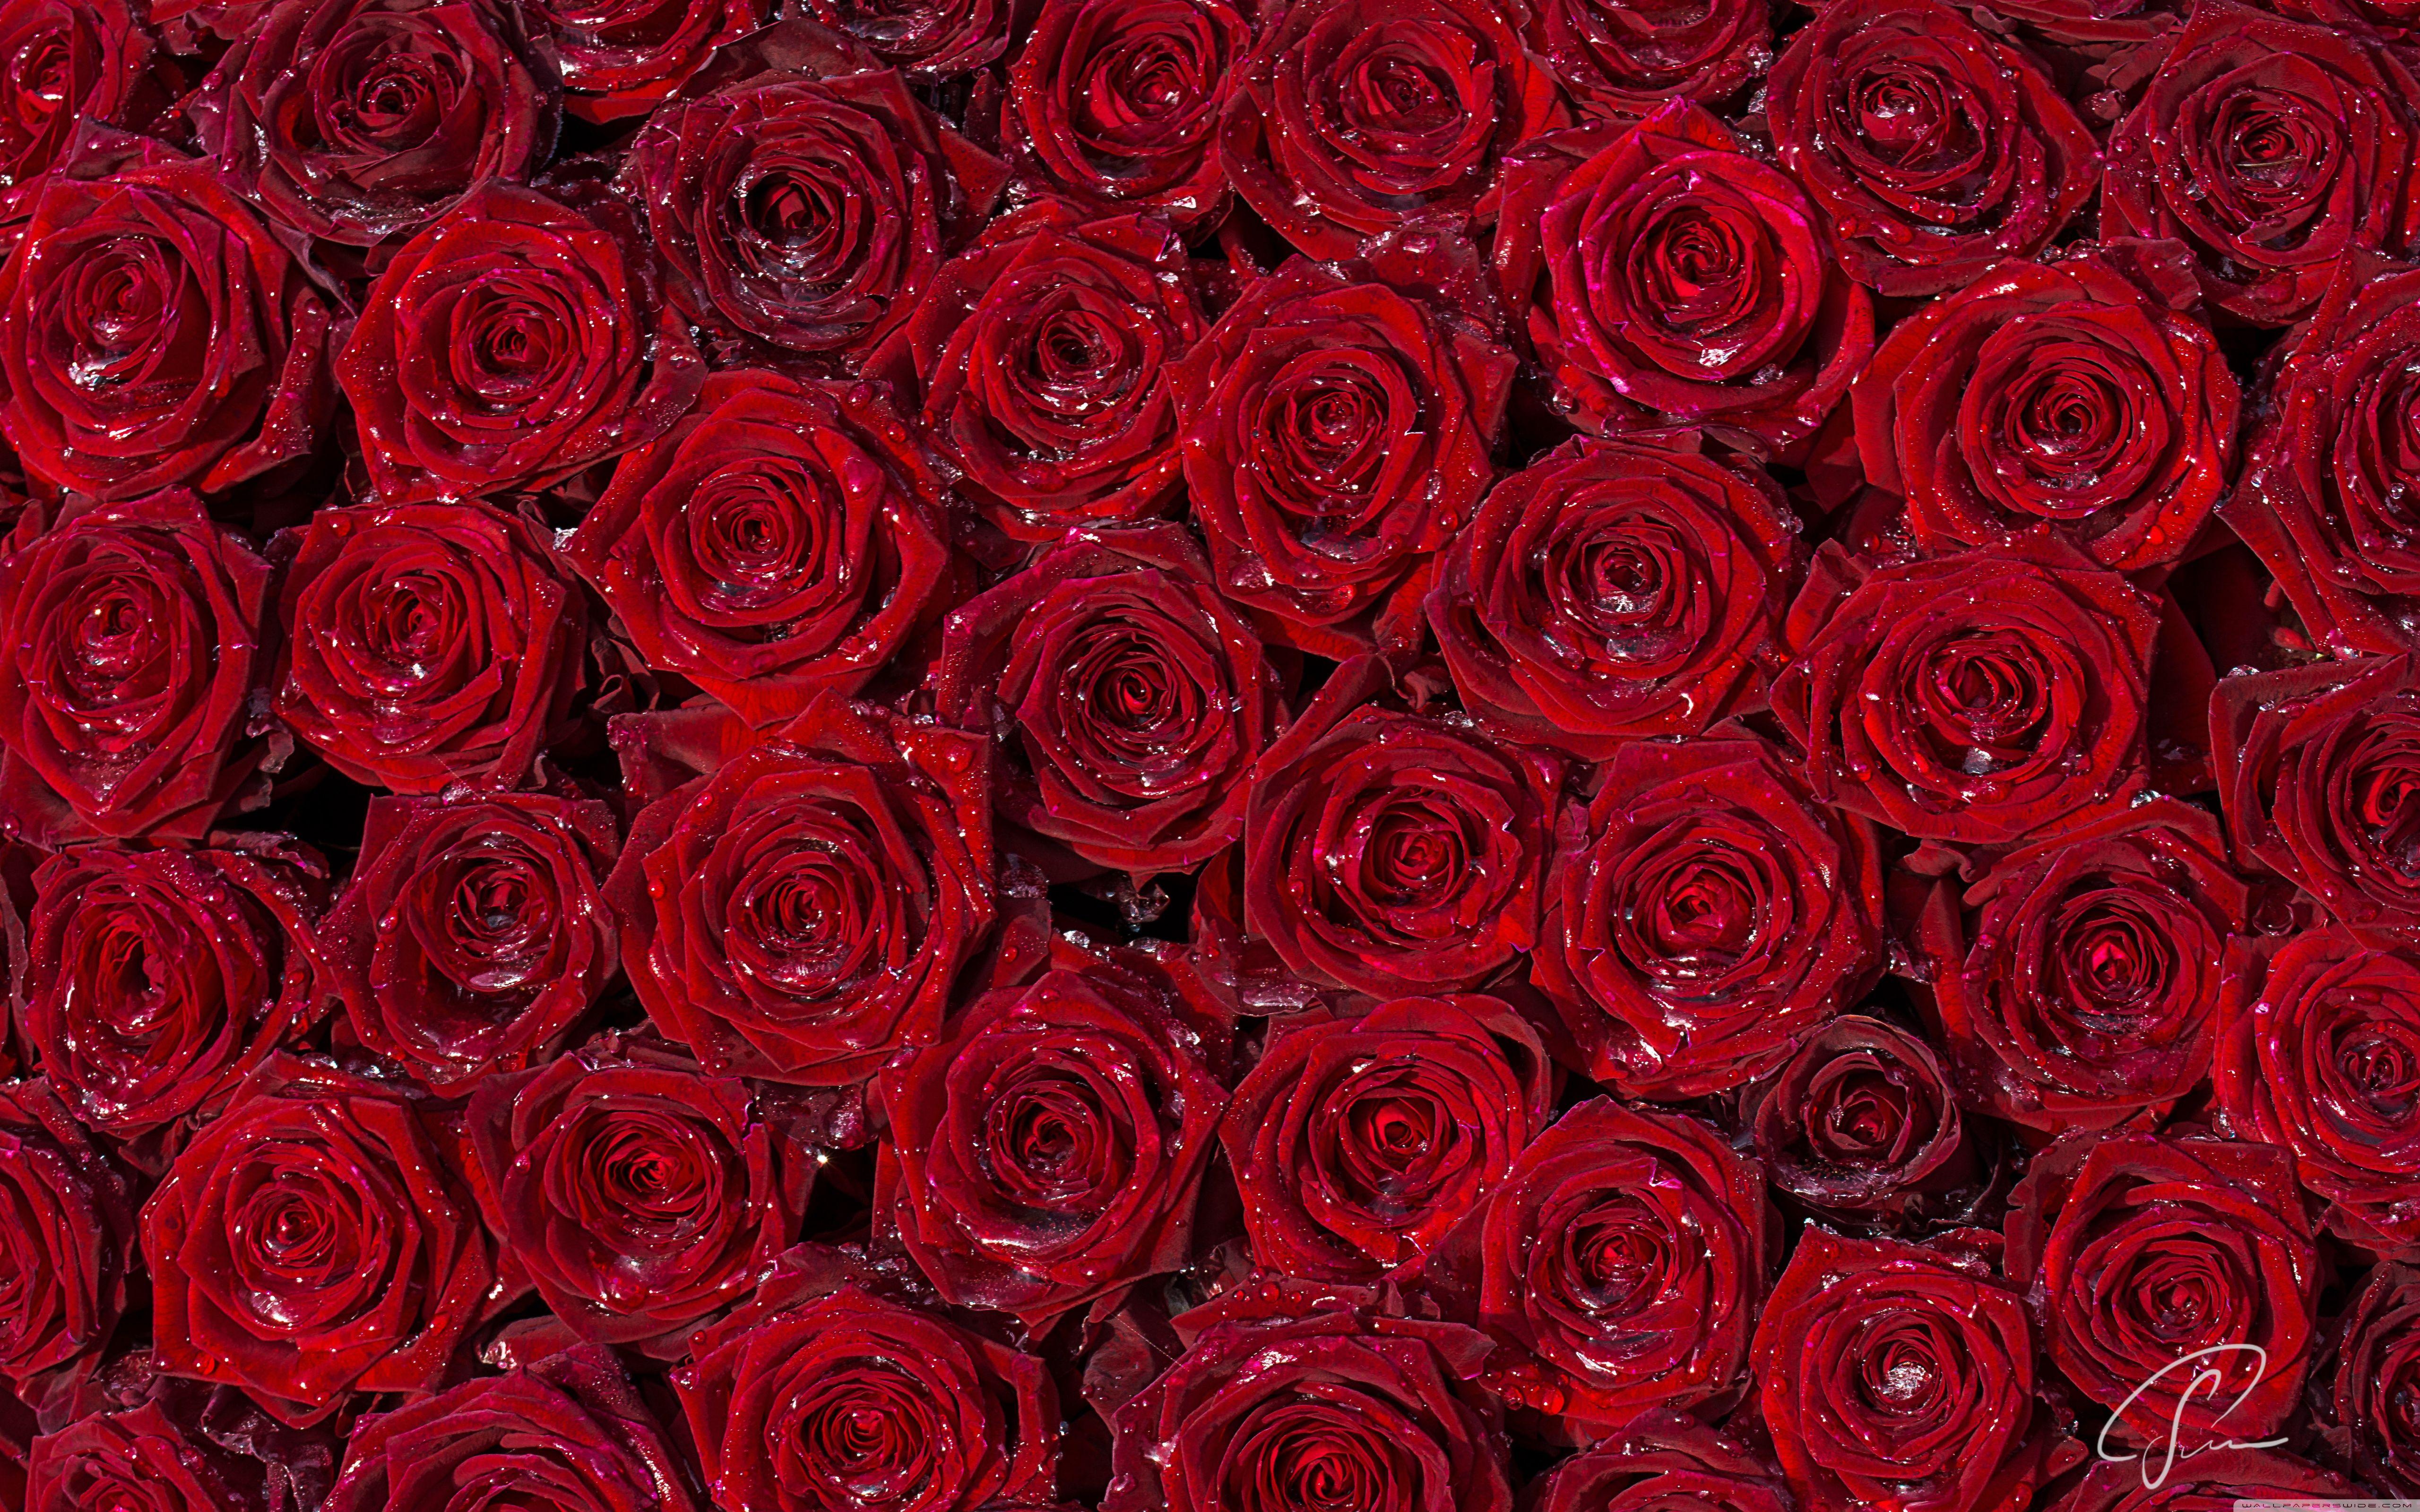 Lots Of Red Roses Wallpapers - Wallpaper Cave.